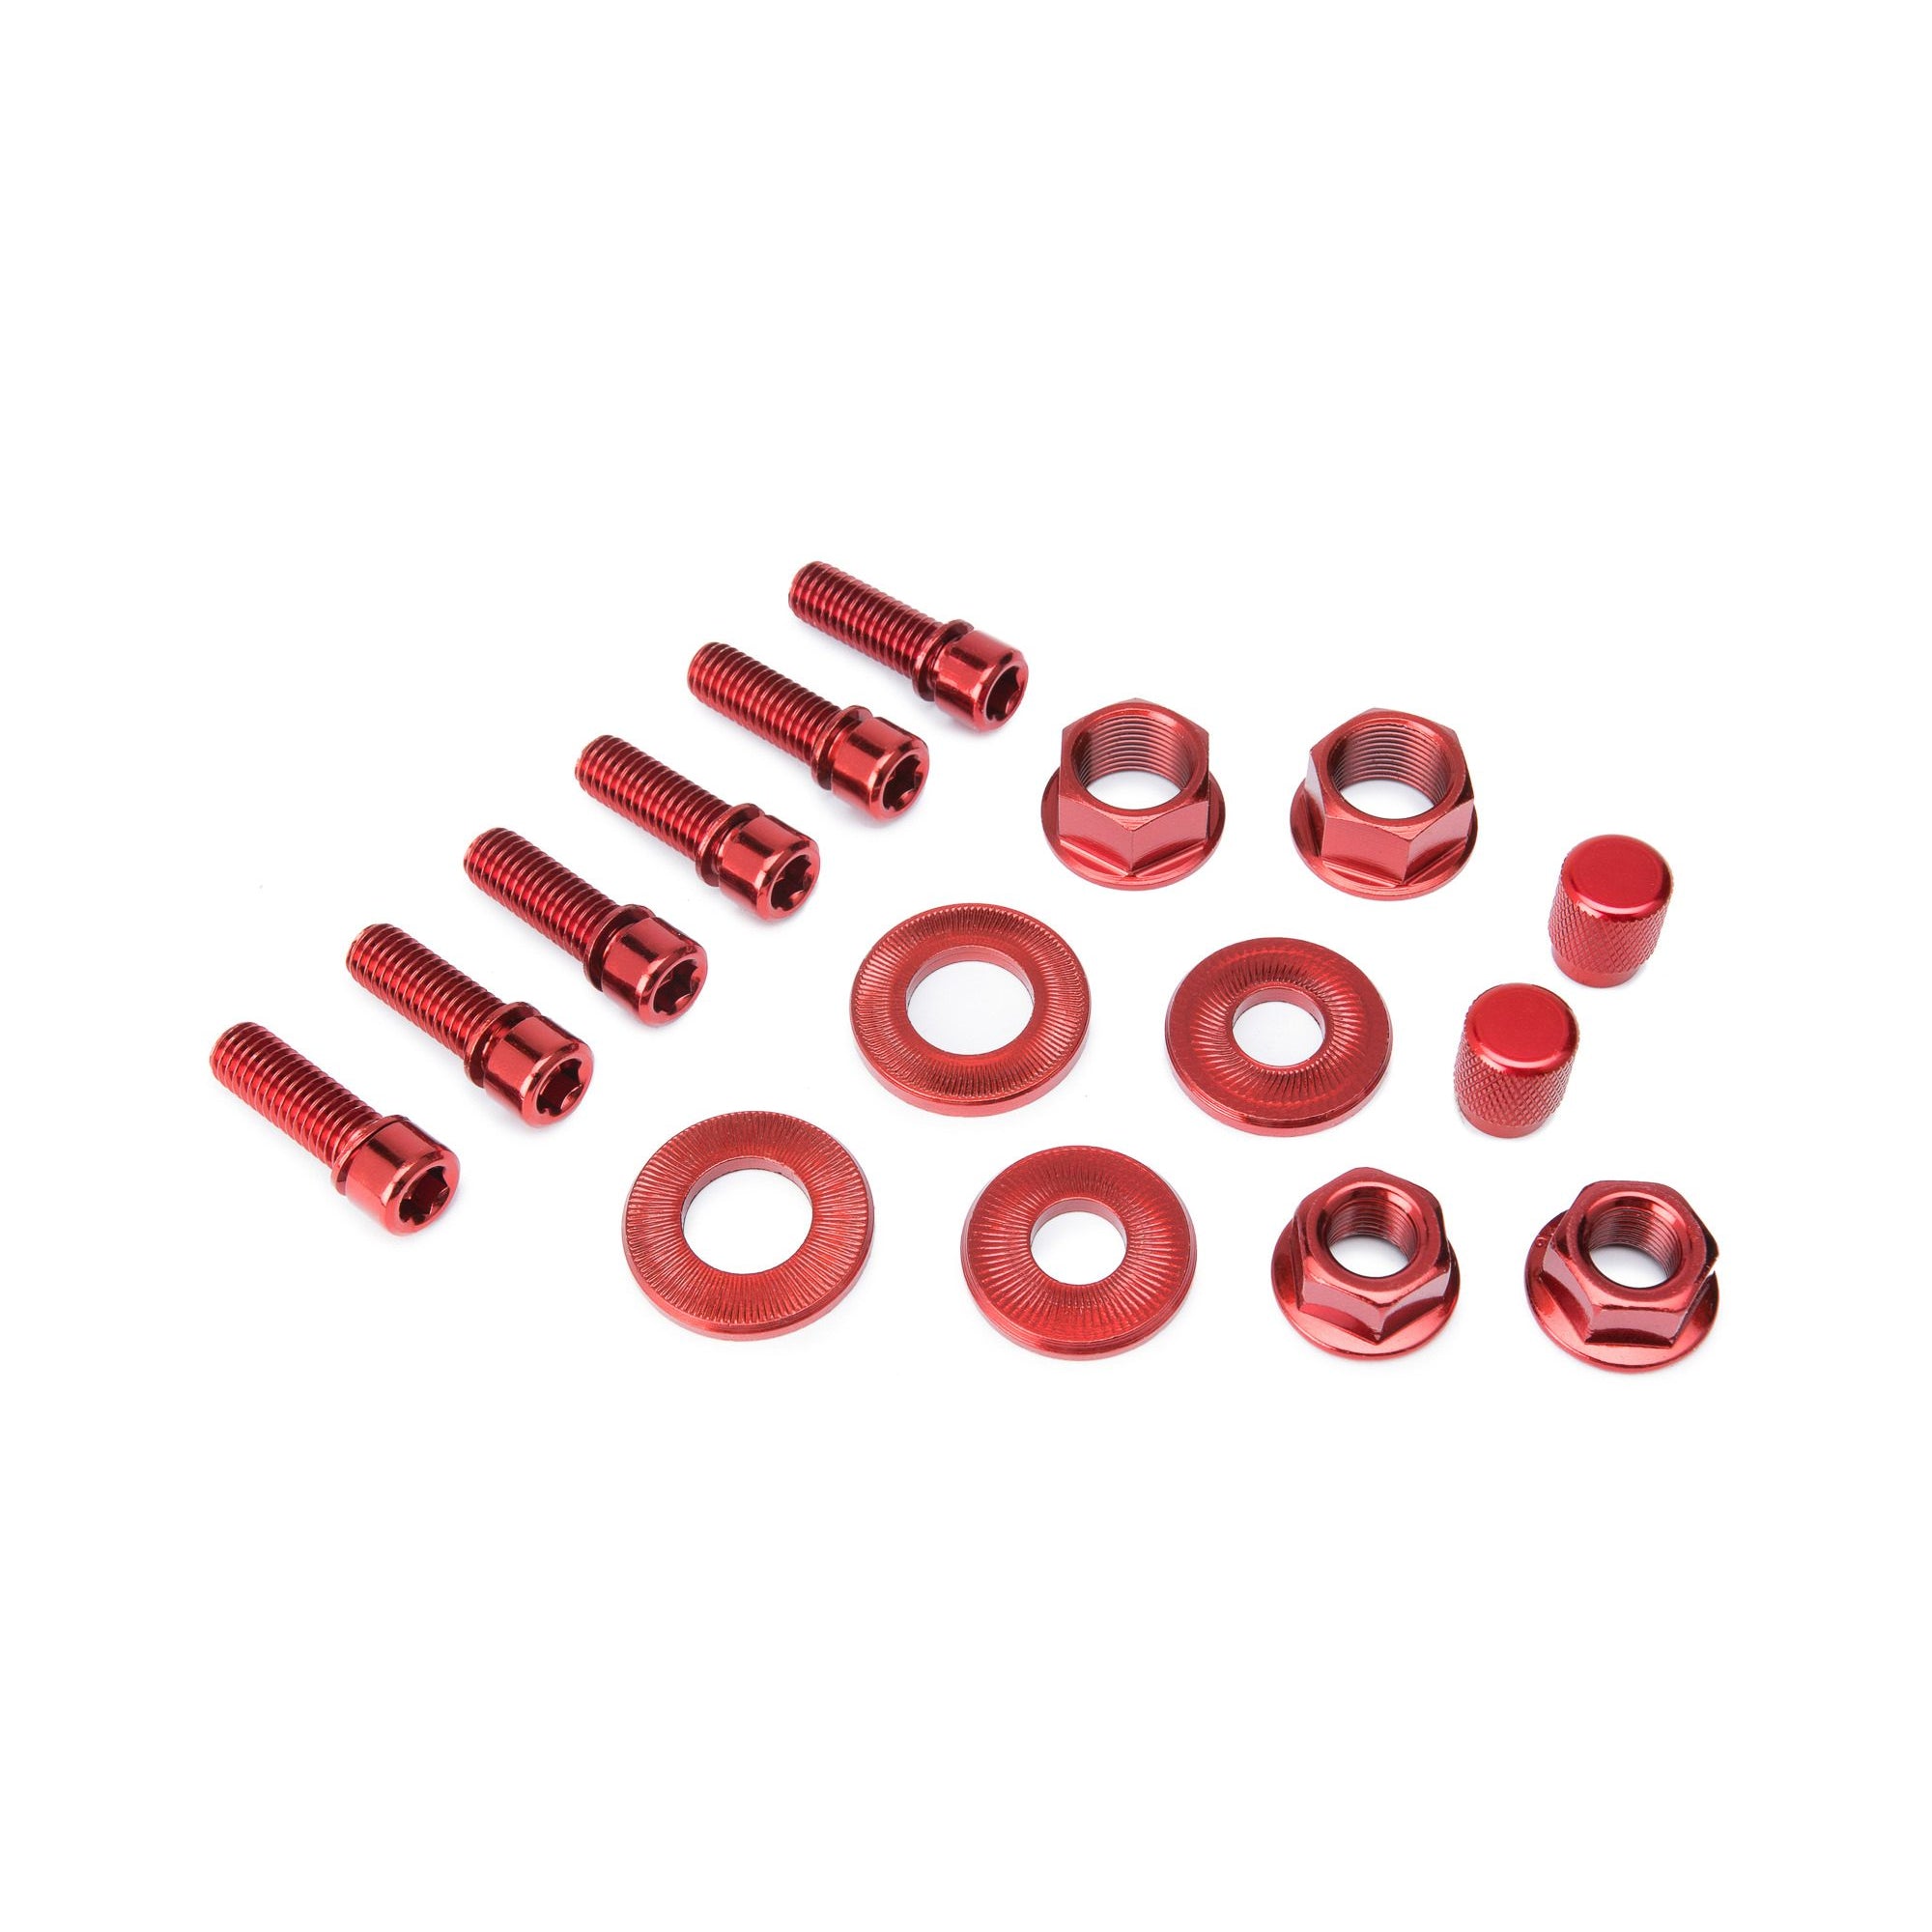 Salt BMX Nut and Bolt kit Stem bolts, Axle Nuts + Washers, Valve Caps - Red